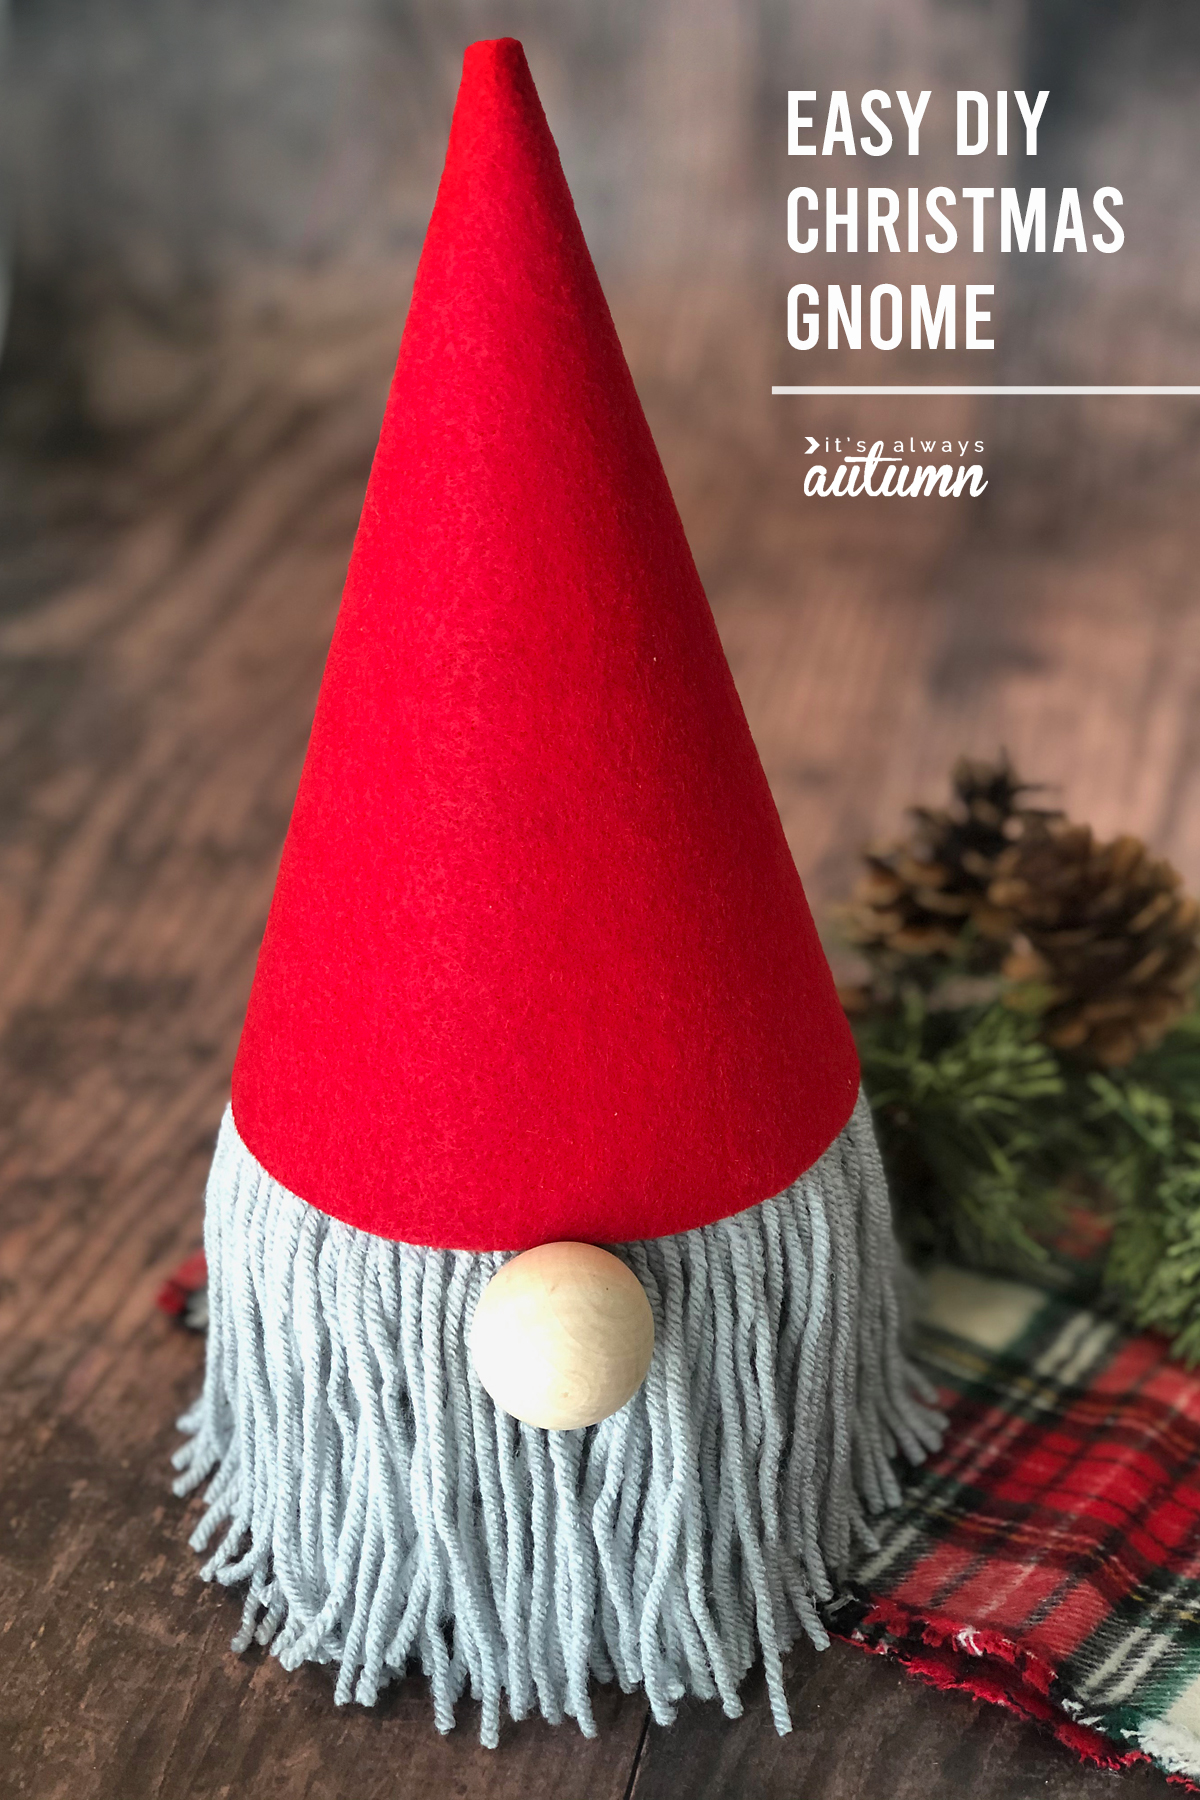 Christmas gnome made from toilet paper roll with yarn beard and red felt hat